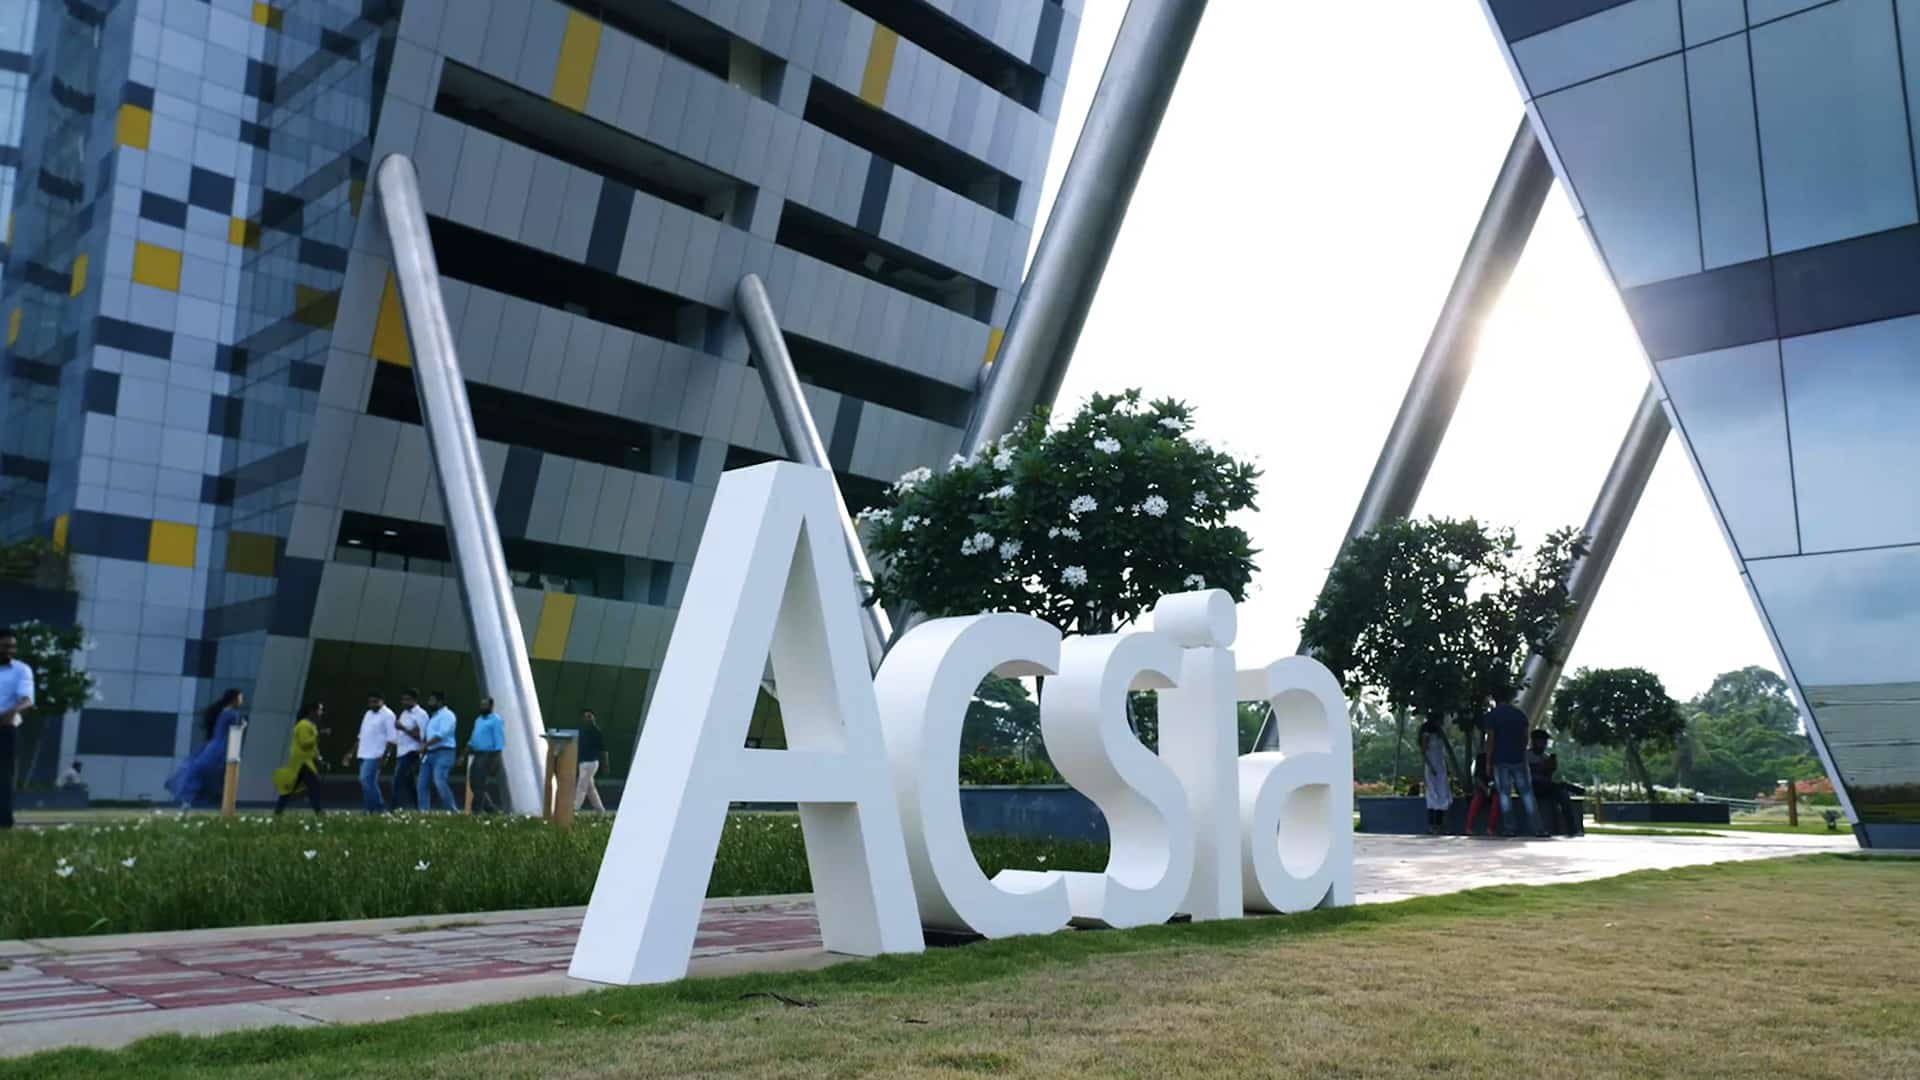 Acsia acquires German start-up,Acsia, electric vehicles, vehicle innovation, Software Defined Vehicles, automotive software company, auto technology